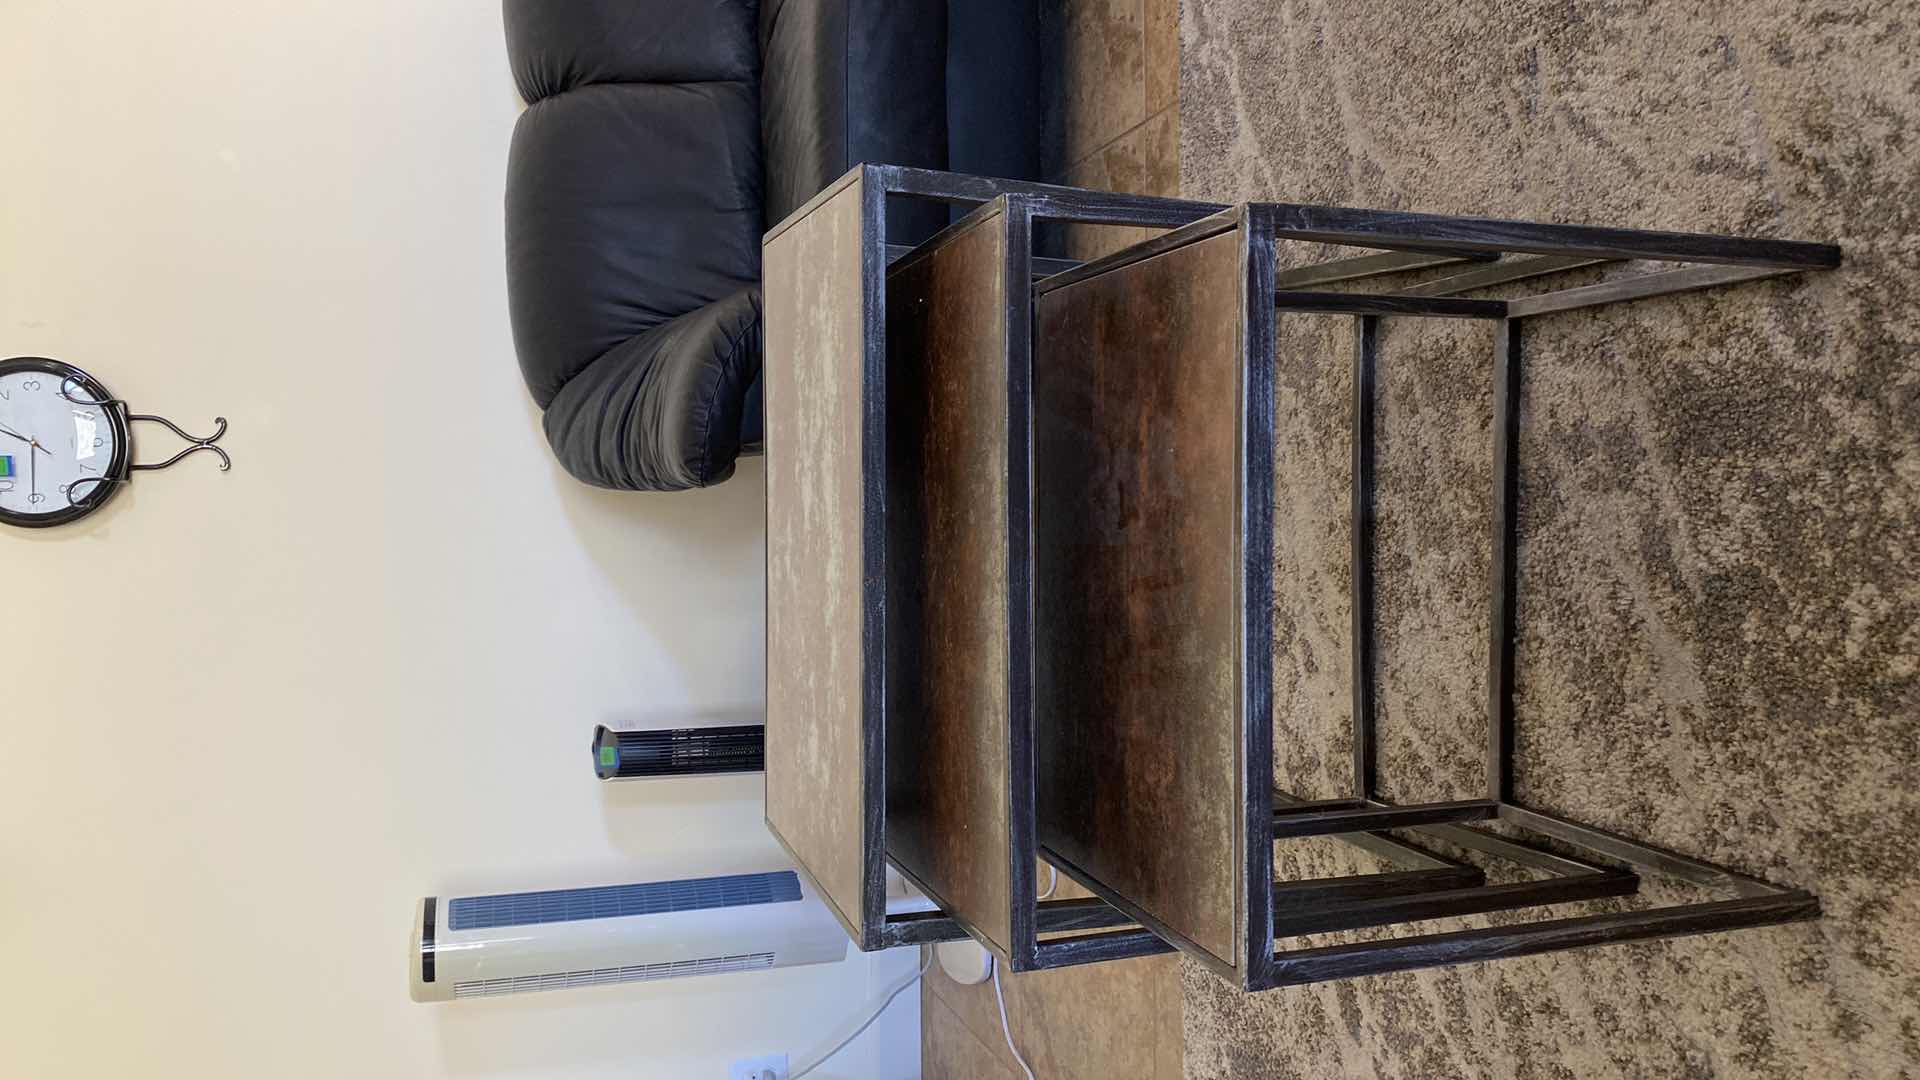 Photo 2 of 3 NESTING END TABLES FAMILY ROOM LARGEST 24 1/2” x 16” H 24”